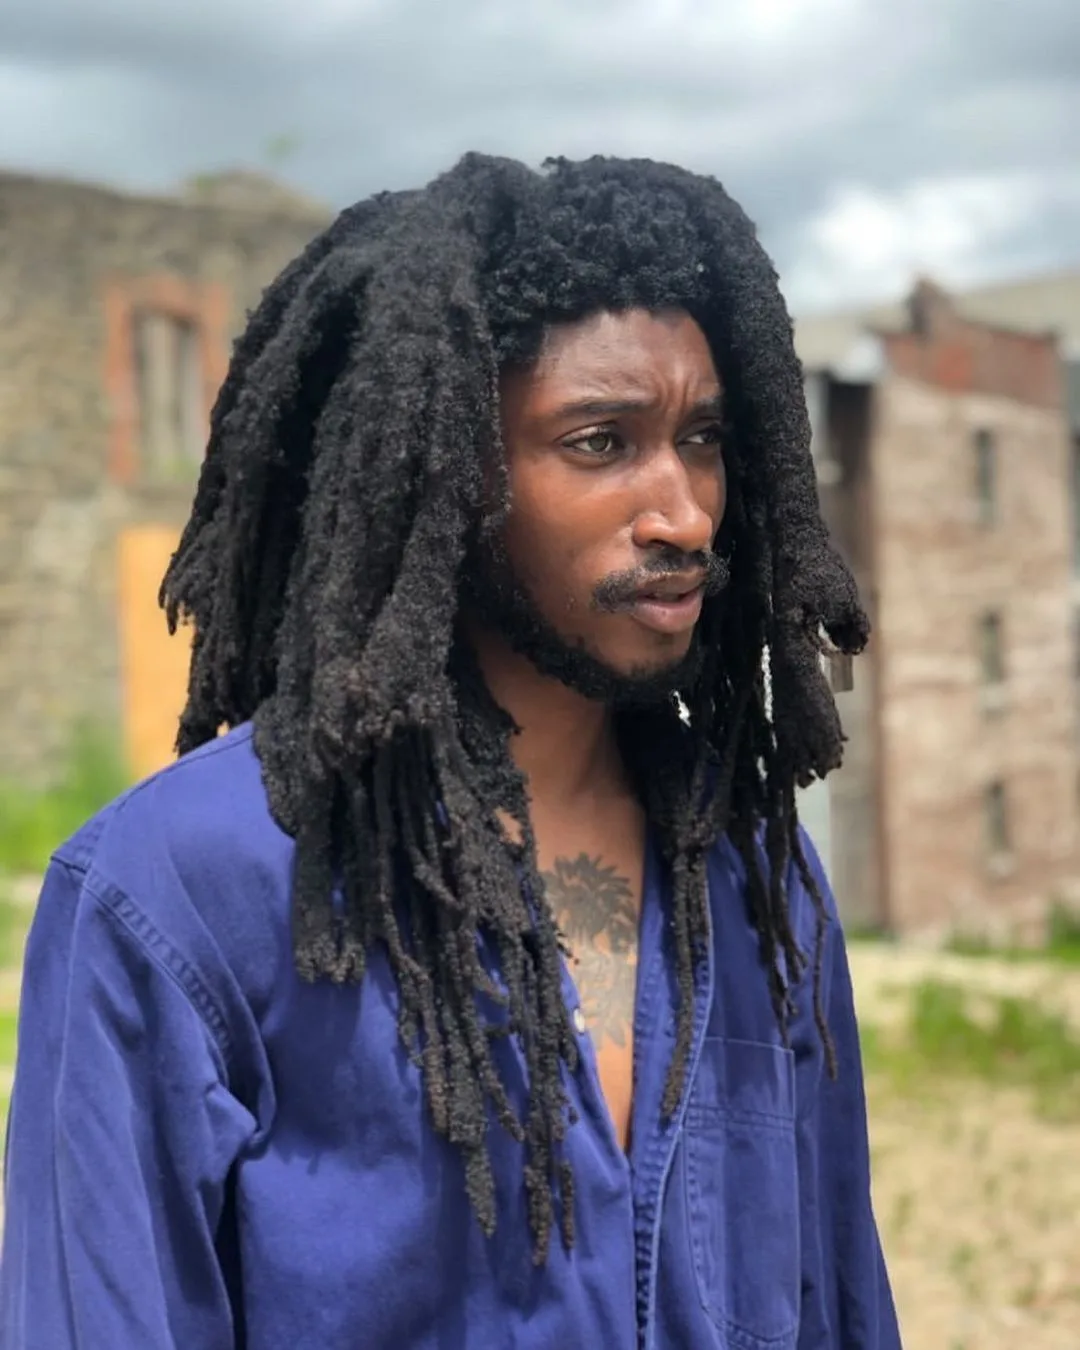 Image of a man with Congo freeform locs in a blue shirt squinting outside a brick building